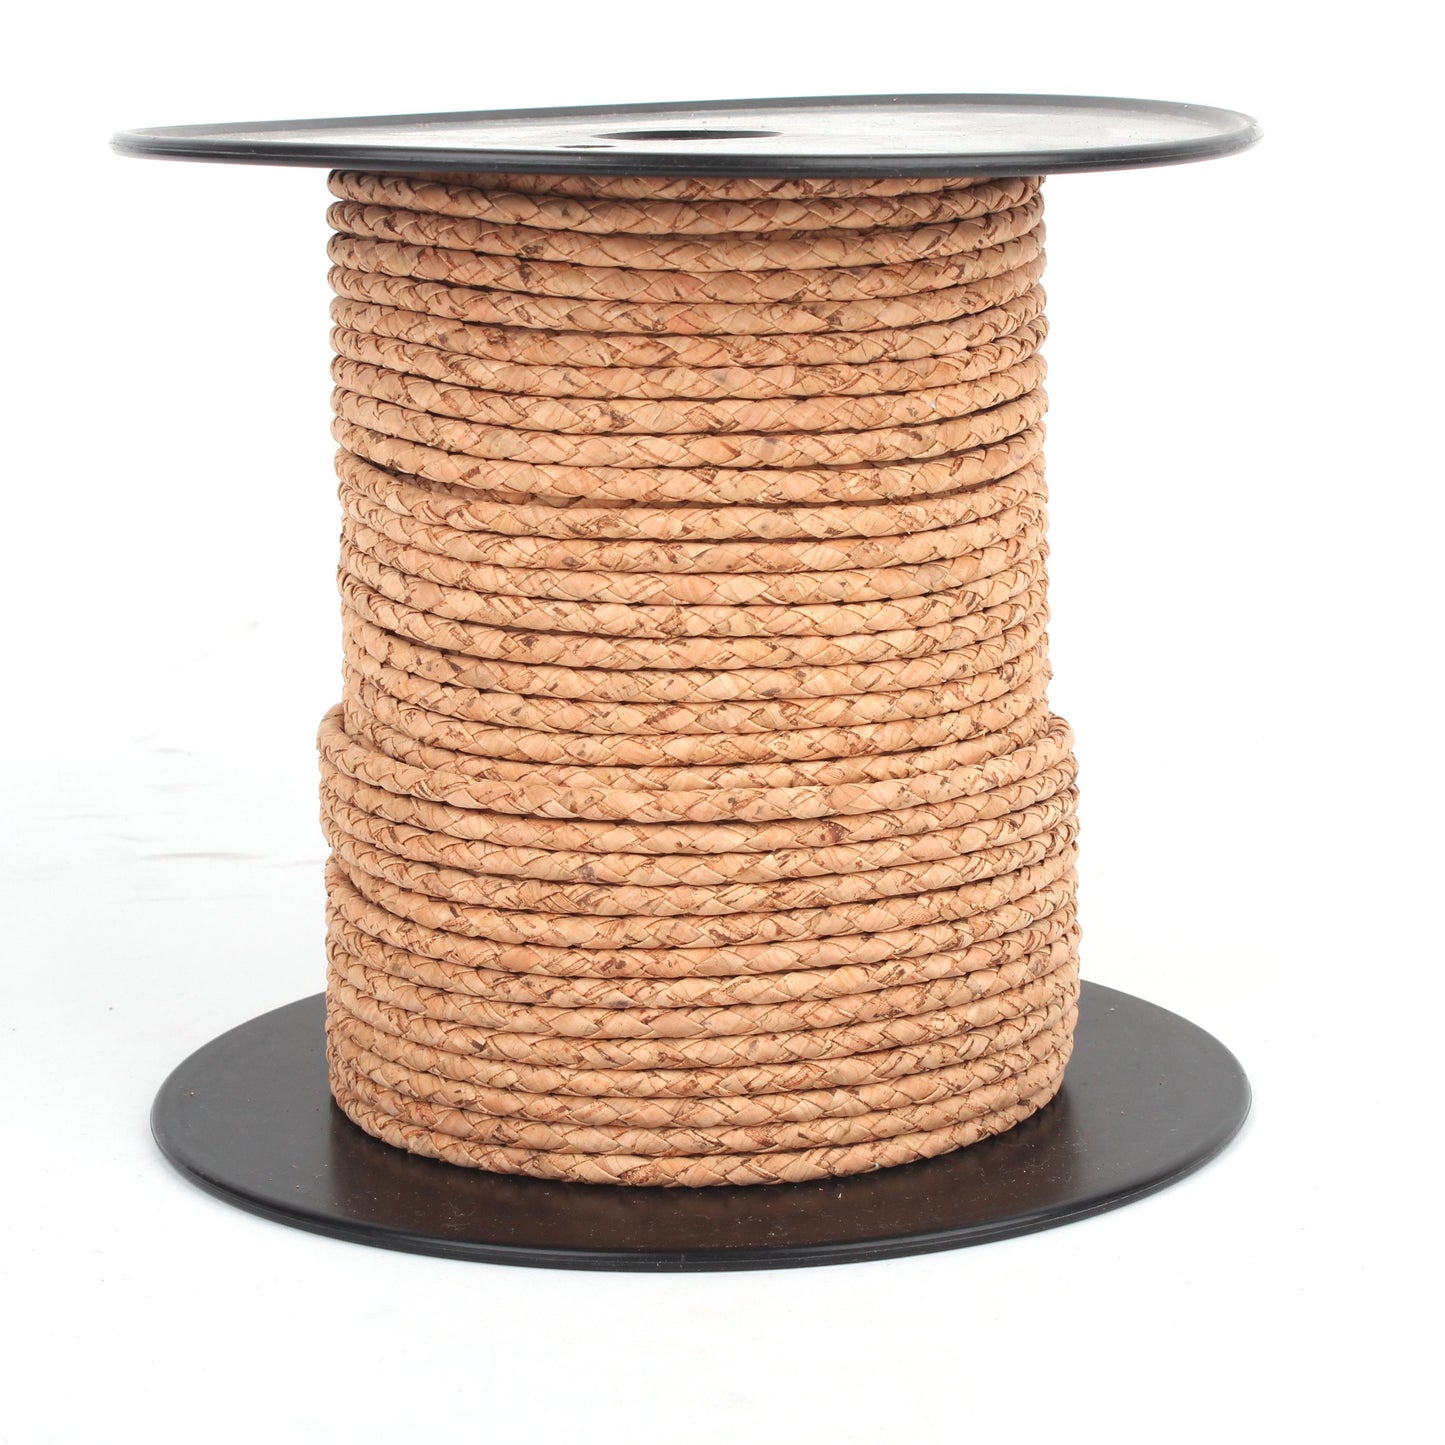 10 meters of 5mm Natural Braided Round Cork Cord COR-124